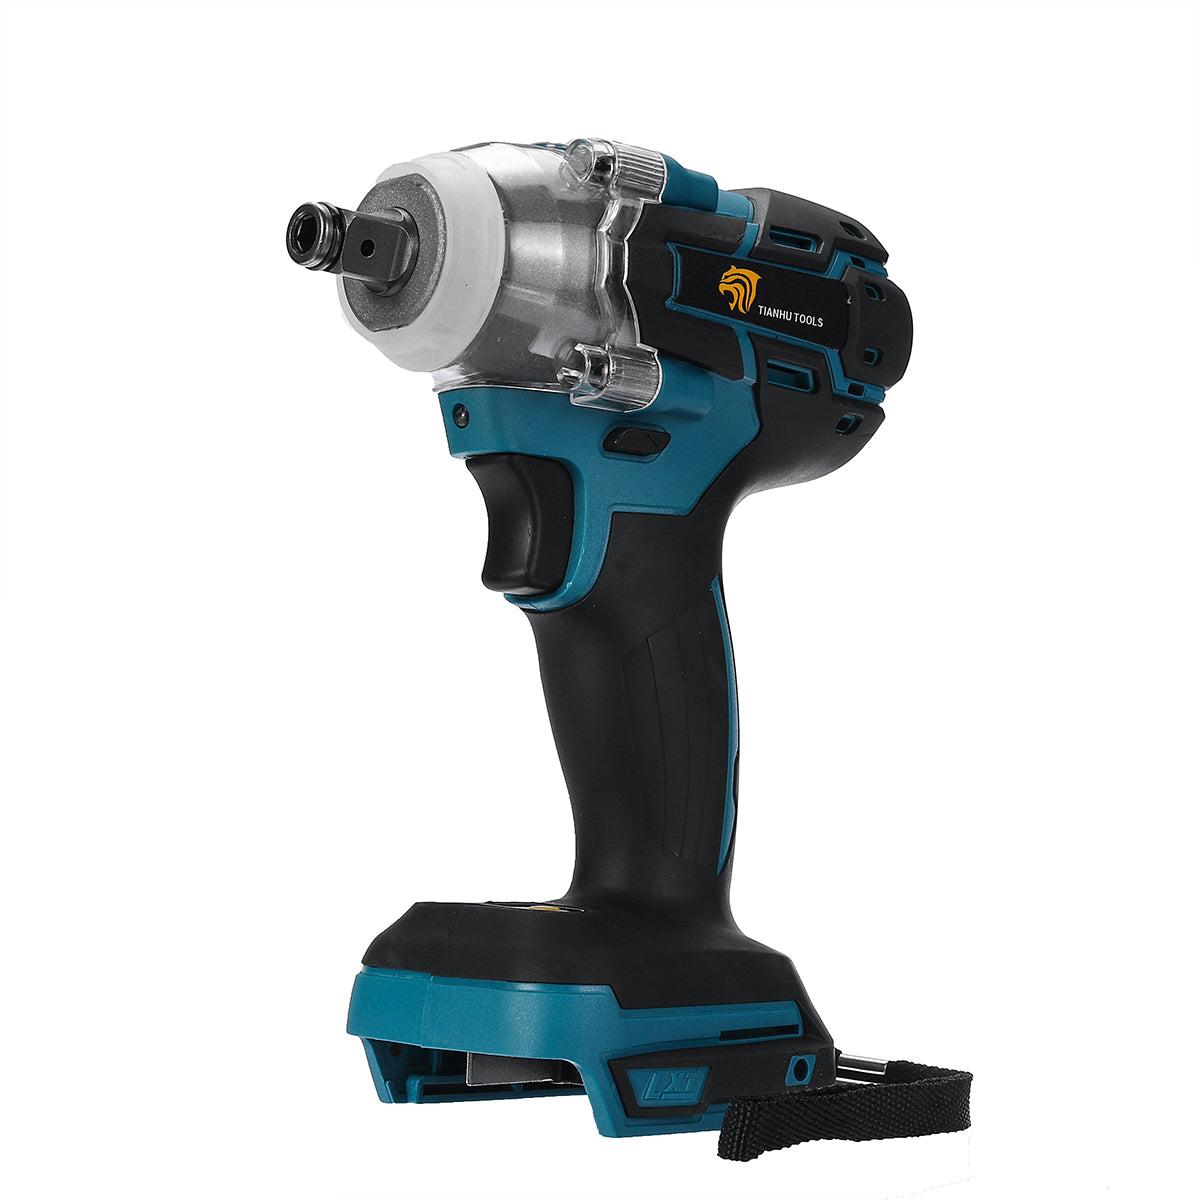 <a href='/1-inch-electric-impact-wrench/'>1 Inch Electric Impact Wrench</a> Tags  : 99 Staggering Electric Impact Wrench Photos Inspirations 99 Fantastic Hand Router tool Photo Collections. 66 Magnificent Park tool torque Wrench Pictures Collections.